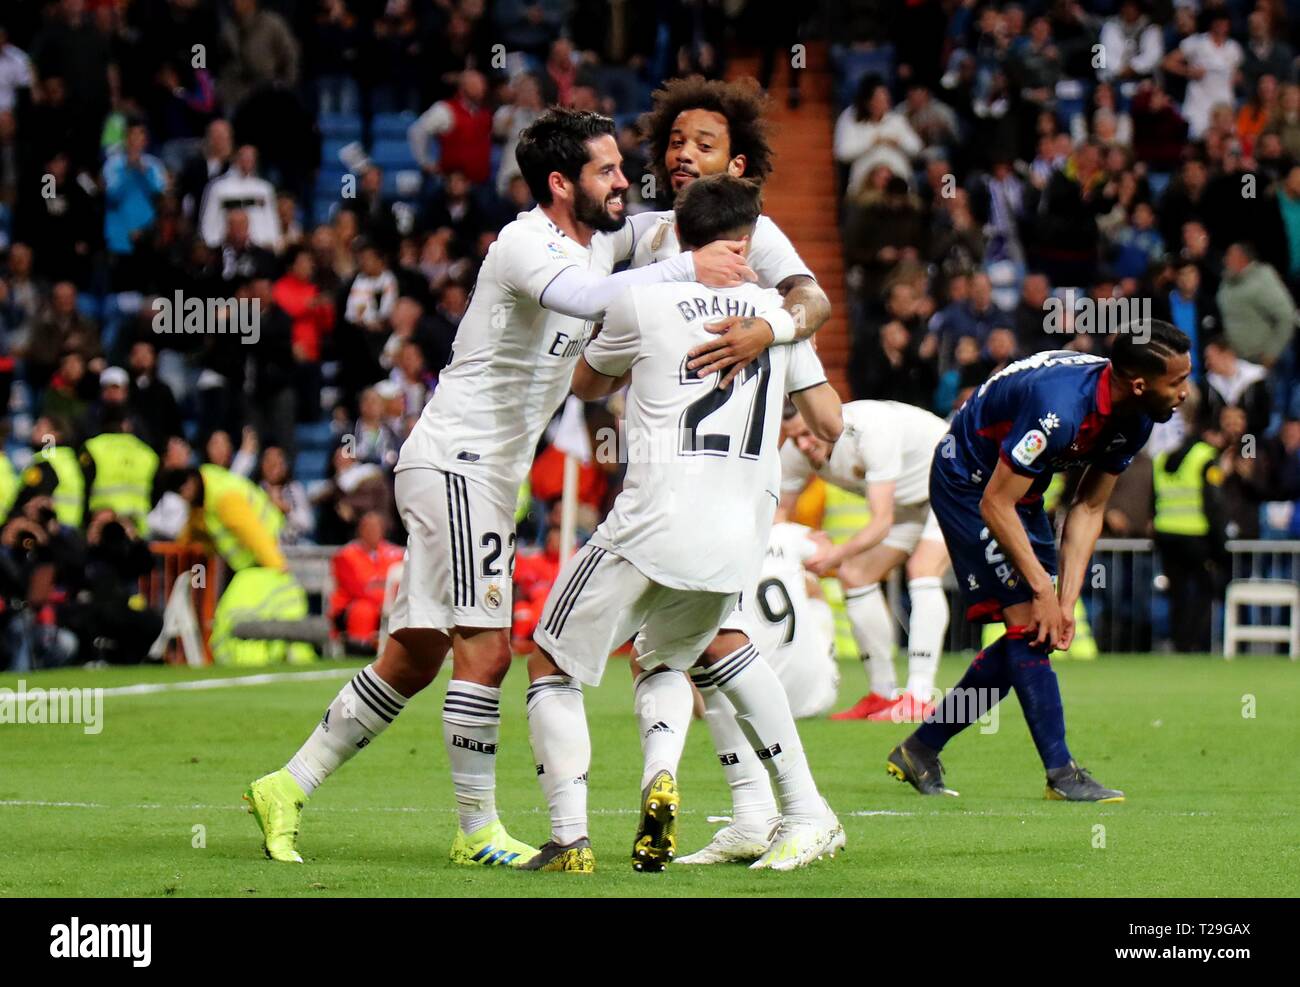 Madrid, Spain. 31st Mar, 2019. Real Madrid's Isco (1st L), Marcelo (2nd L) and Brahim Diaz (3rd L) celebrate during a Spanish league soccer match between Real Madrid and Huesca in Madrid, Spain, on March 31, 2019. Real Madrid won 3-2. Credit: Edward F. Peters/Xinhua/Alamy Live News Stock Photo